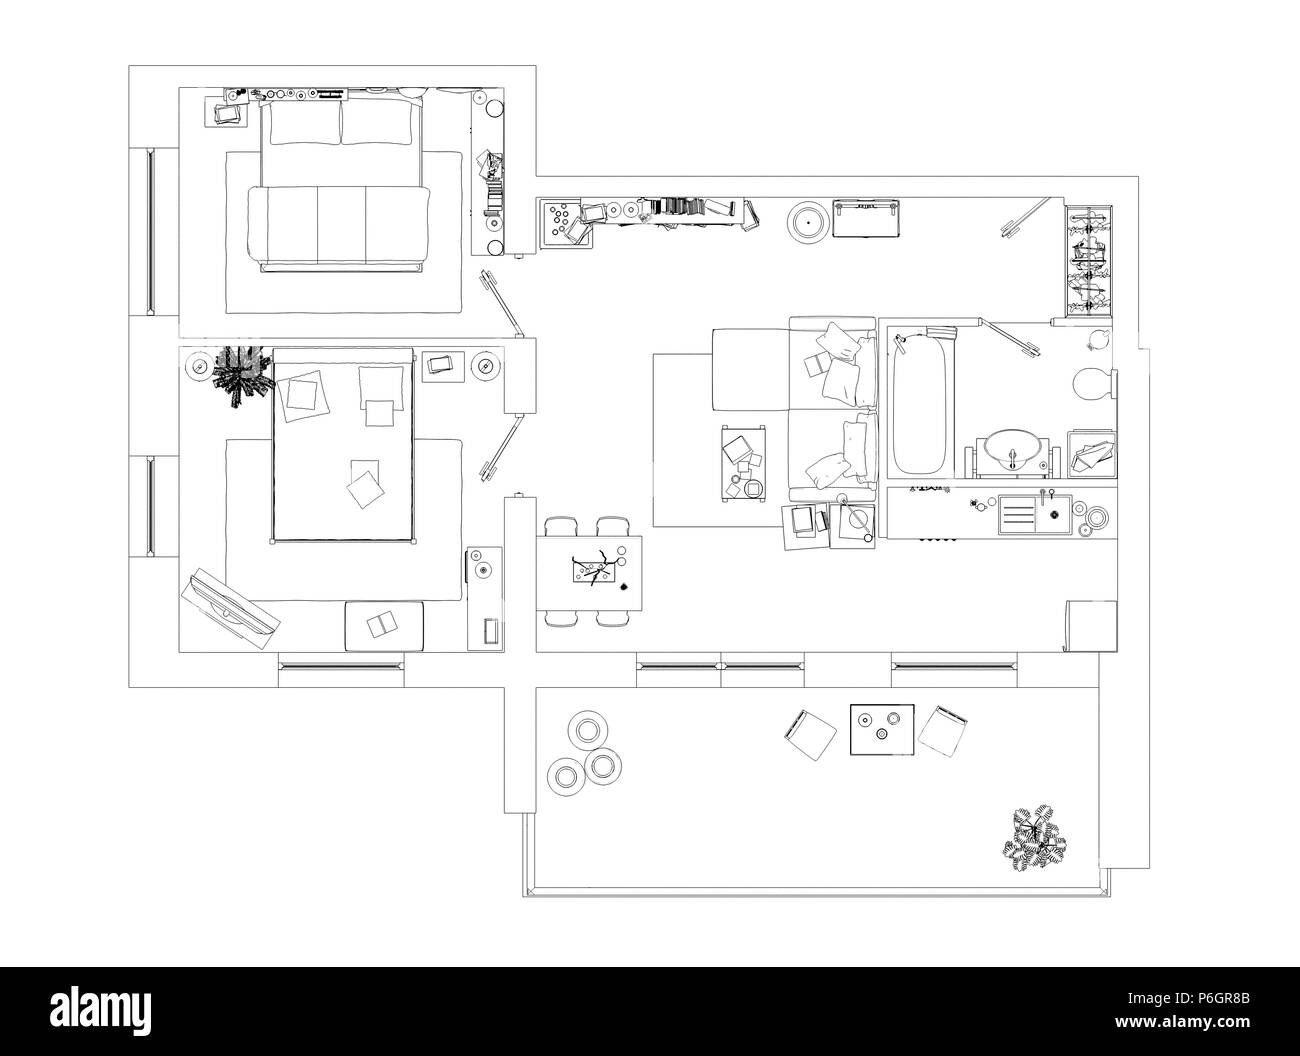 Line drawing apartment floor plan on a white background Stock Photo